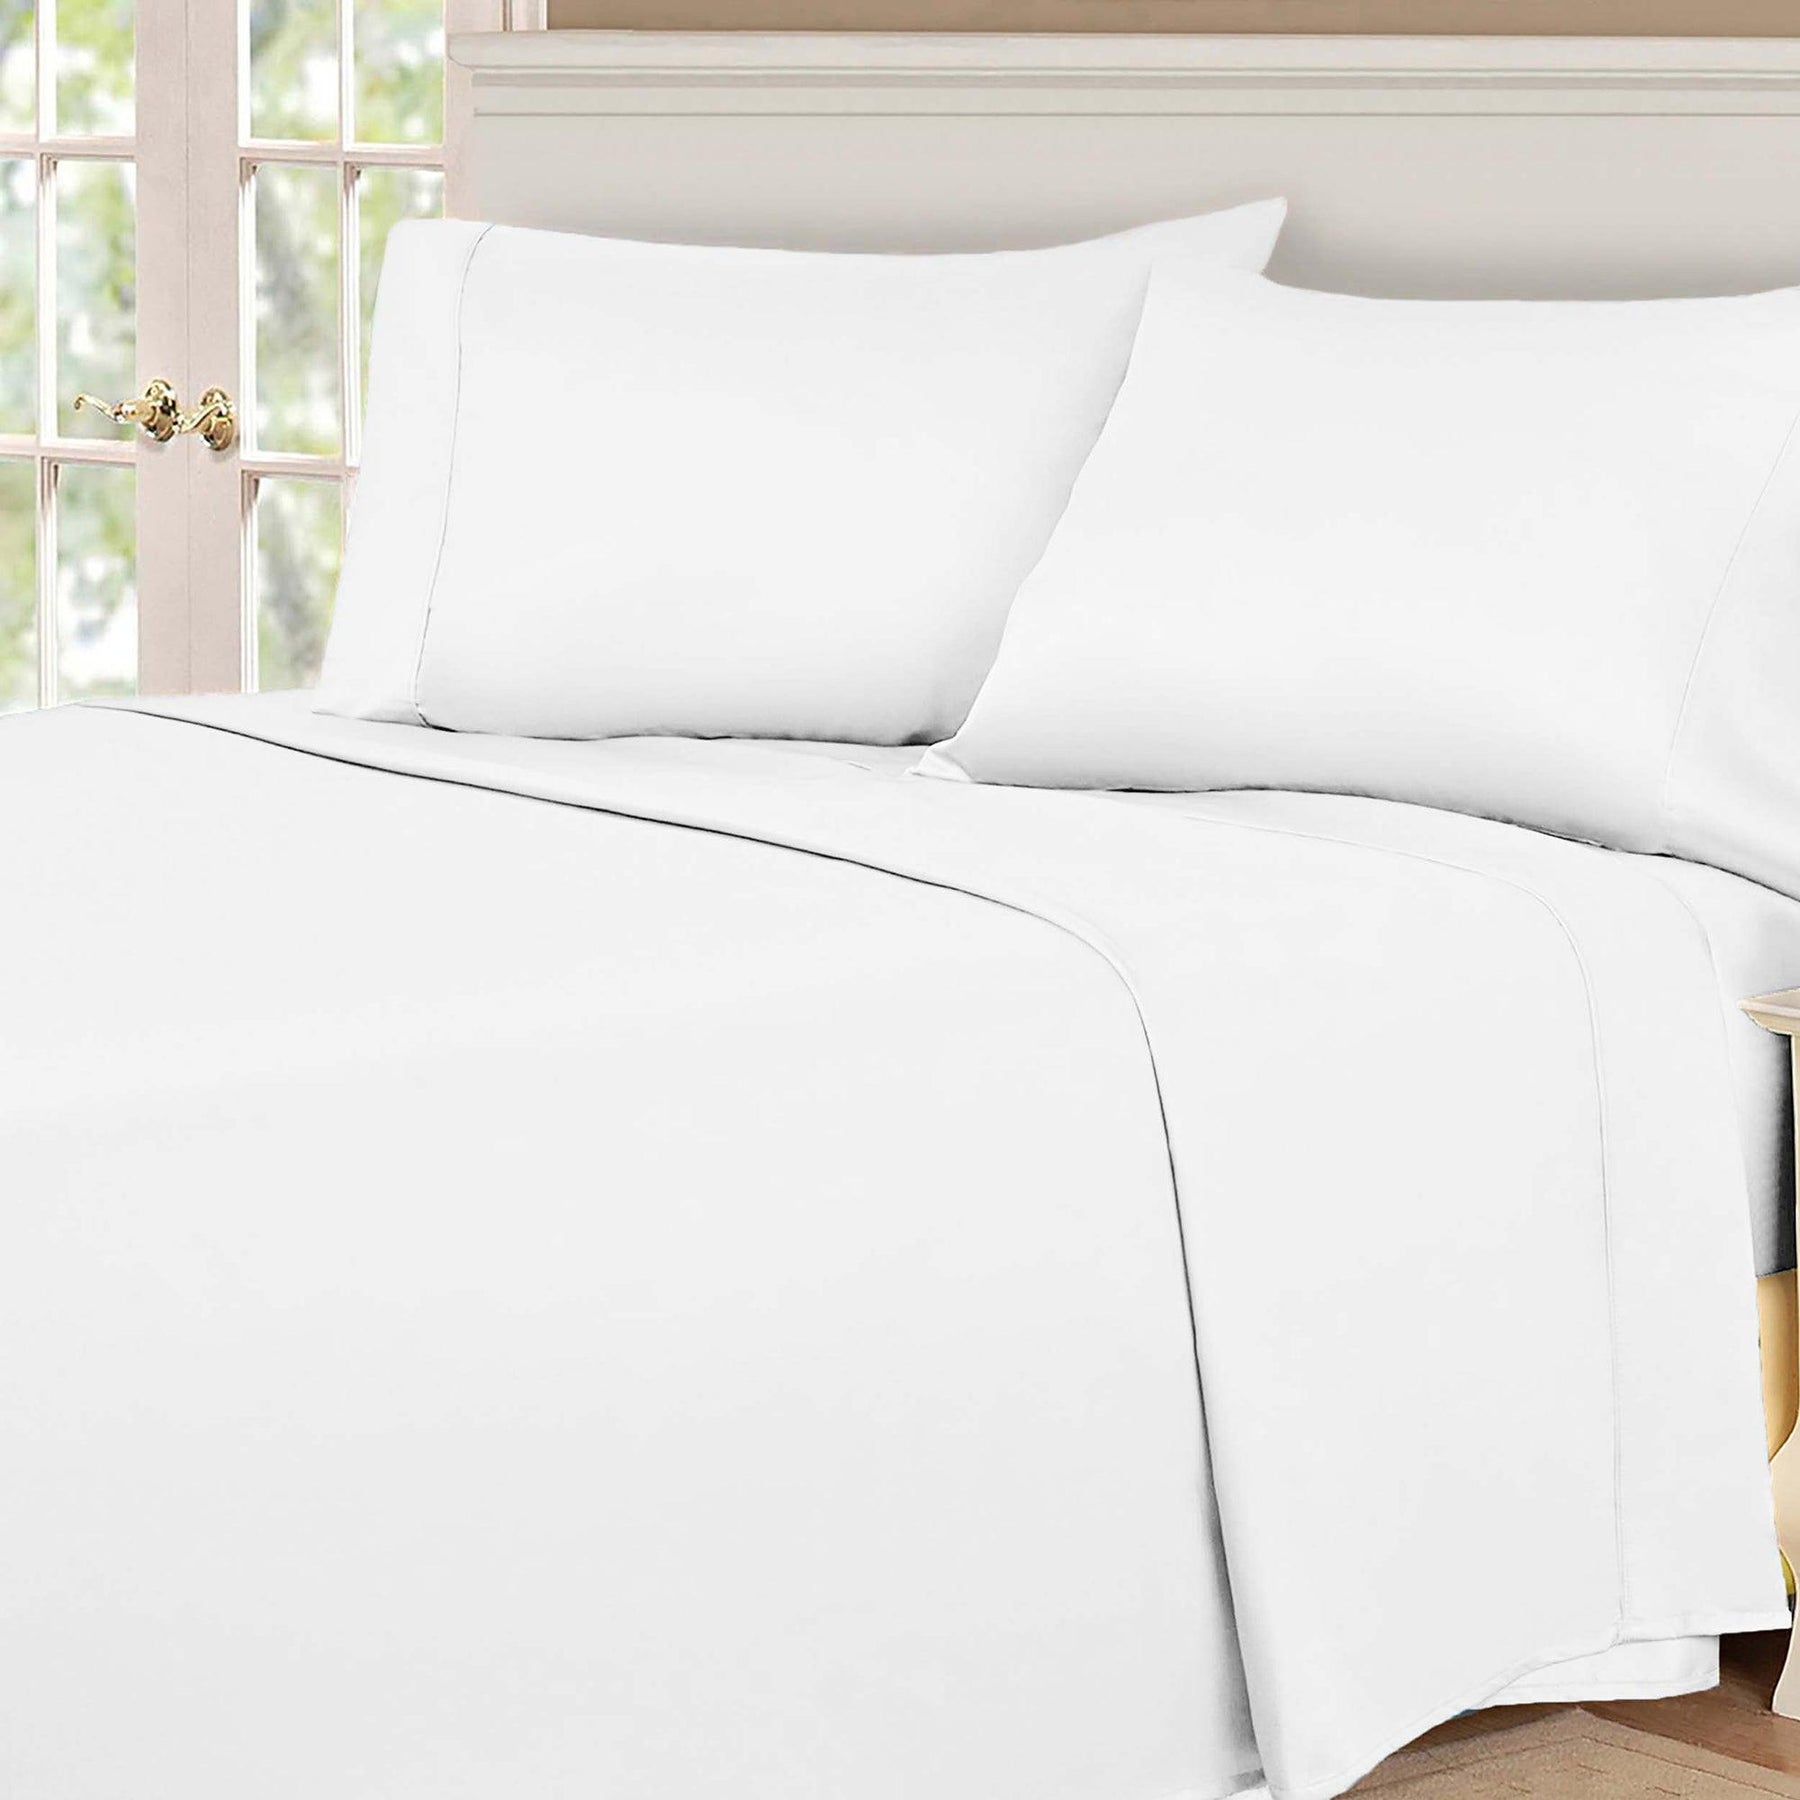  Superior Egyptian Cotton 530 Thread Count Solid Sheet Set - White